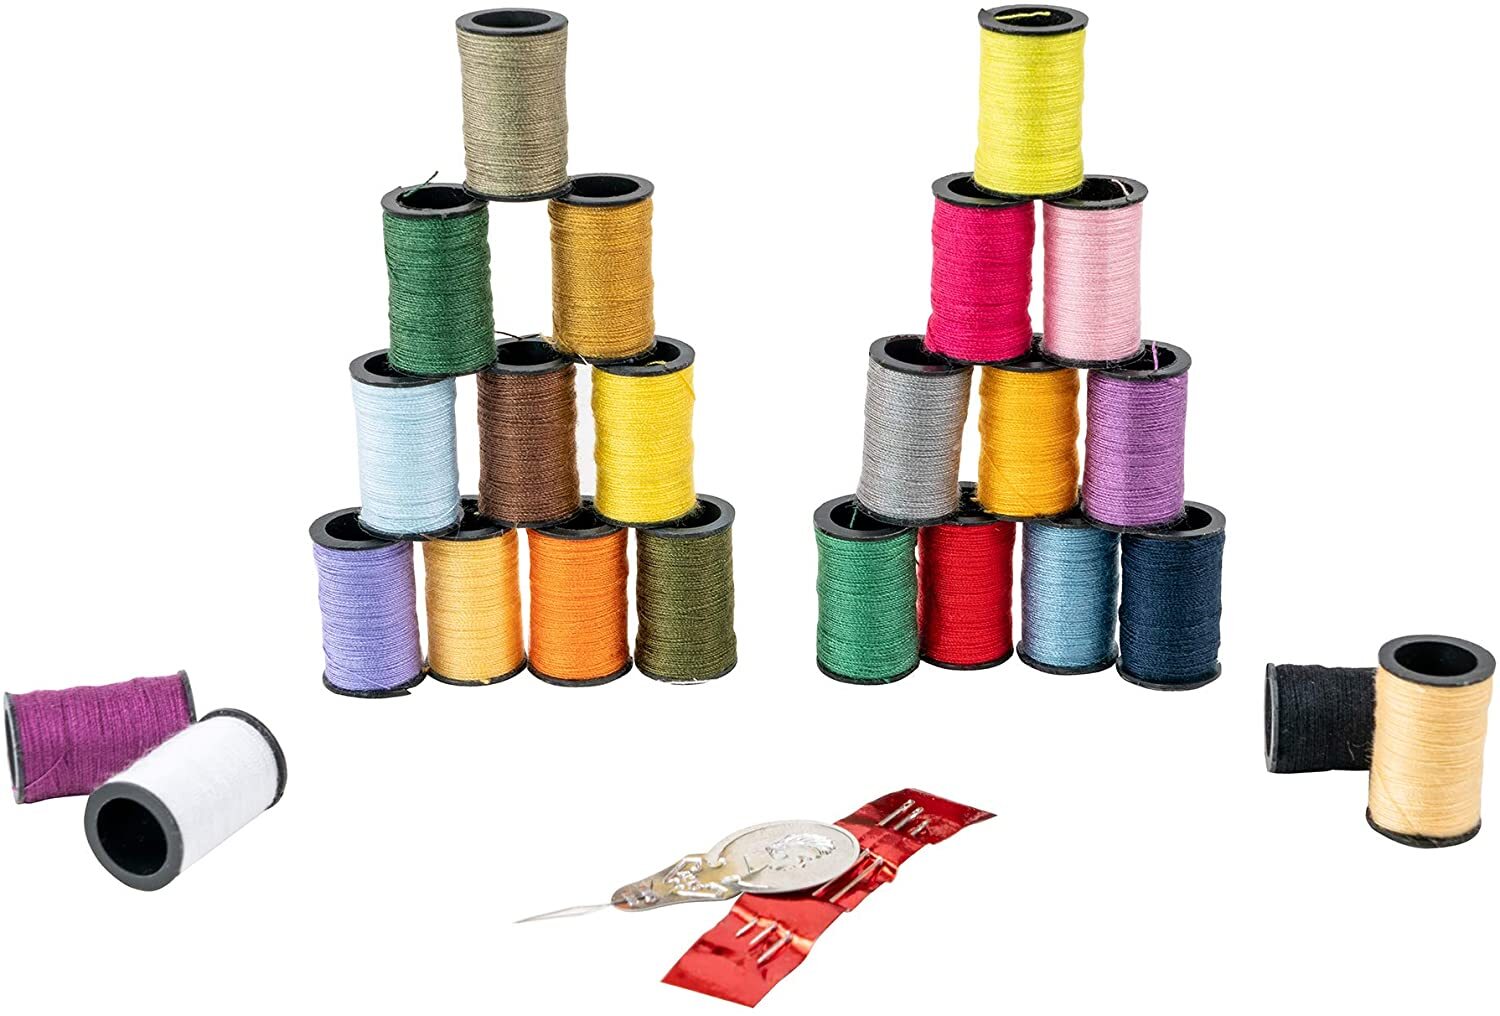 Singer Thread Spools with Threader, 24 Count